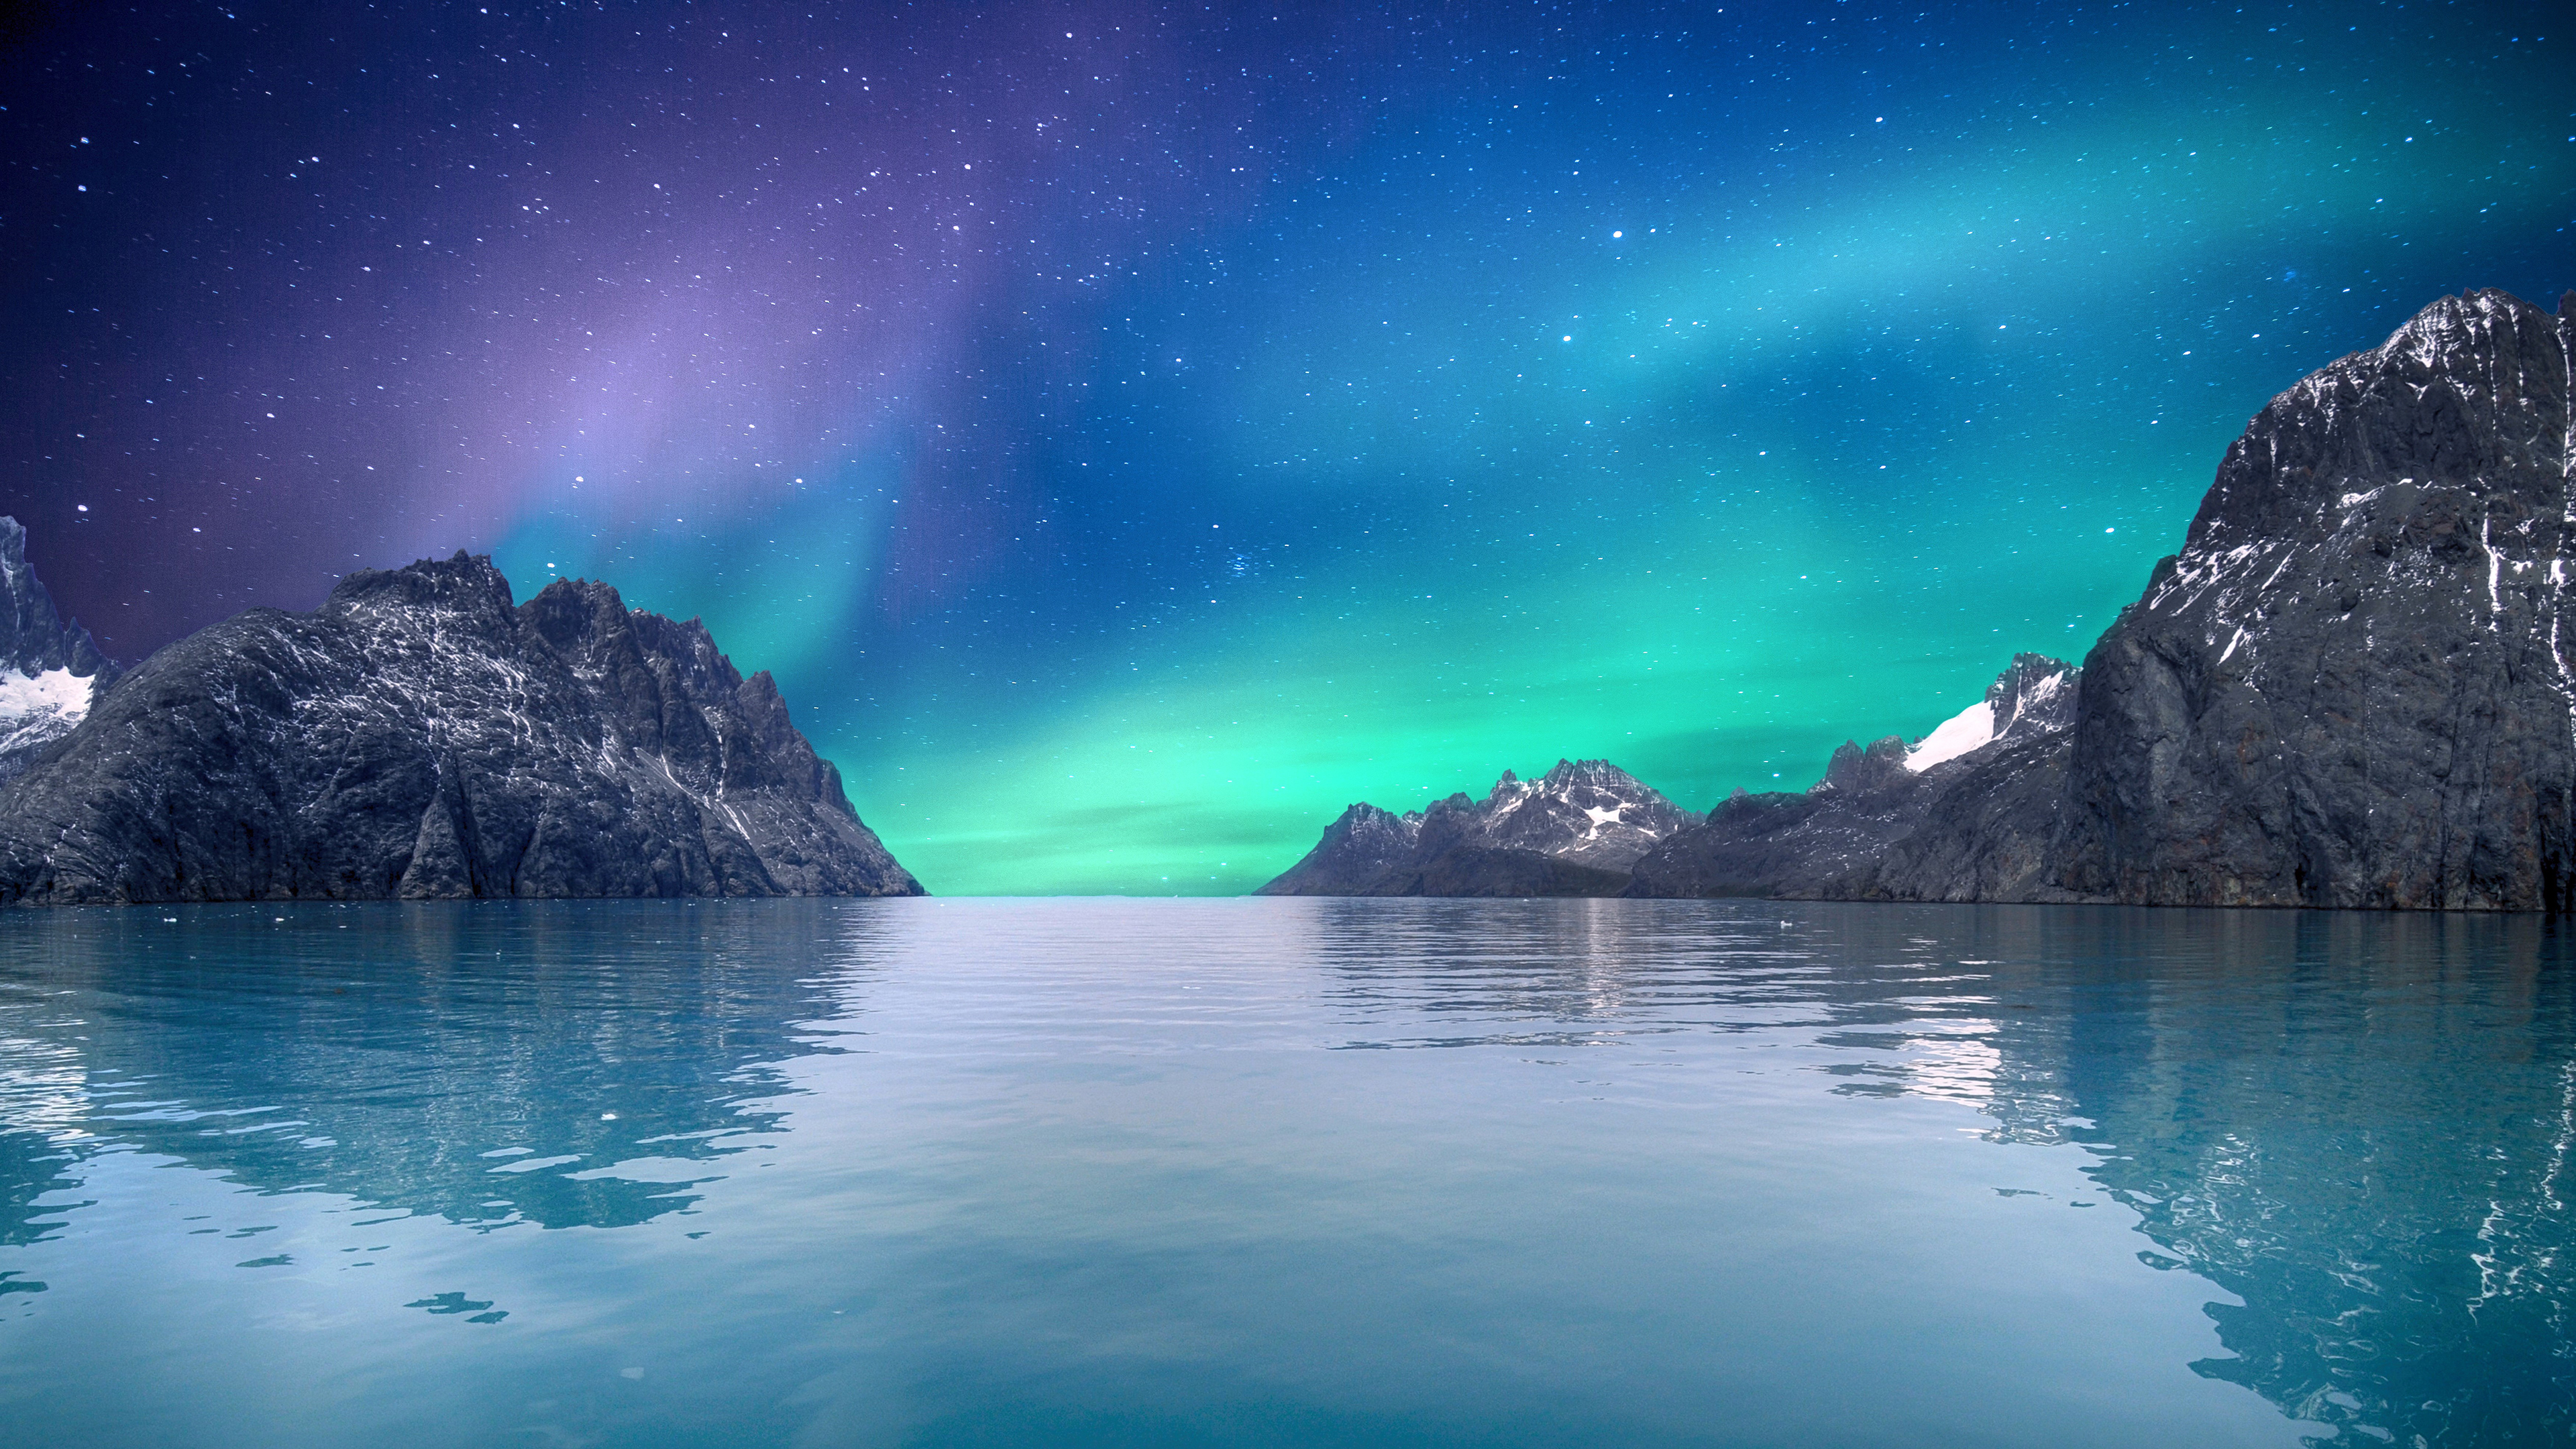 Aurora 4k Borealis Wallpaper Hd Nature 4k Wallpapers Images Photos And Background